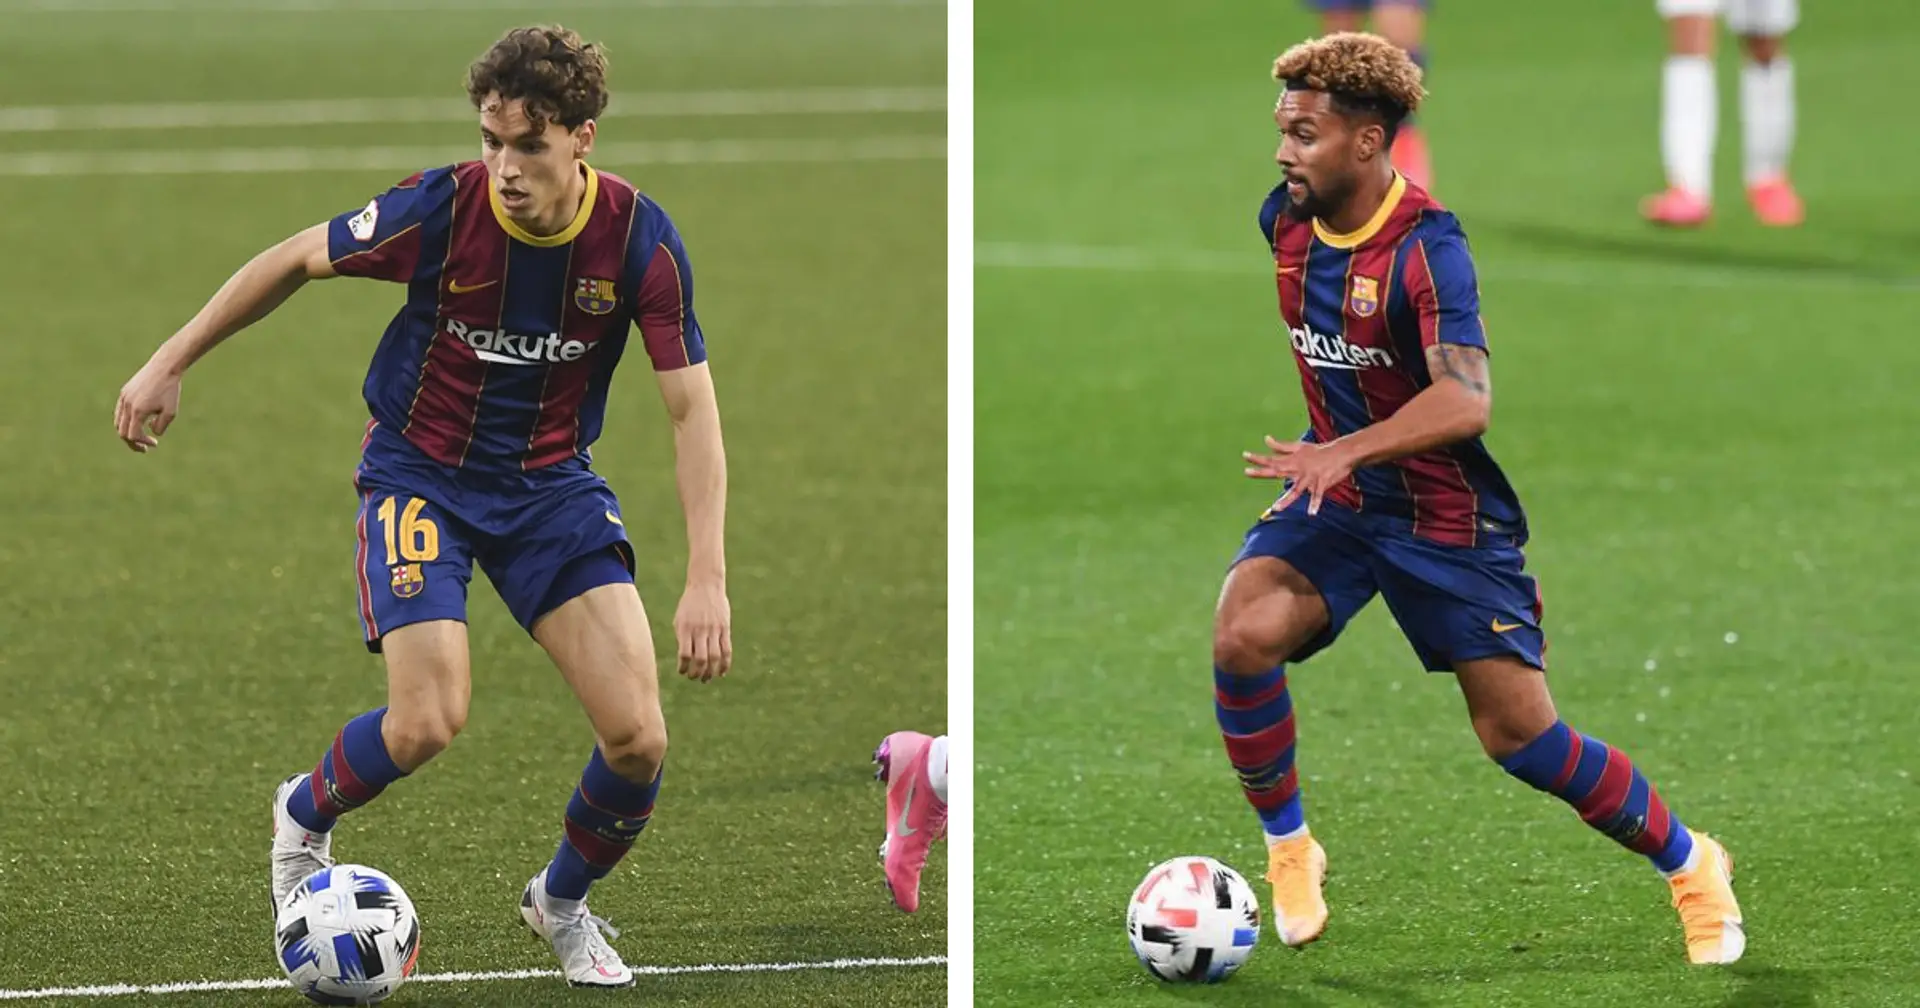 Looking up to the seniors? Barca B continue bad run of form with another loss